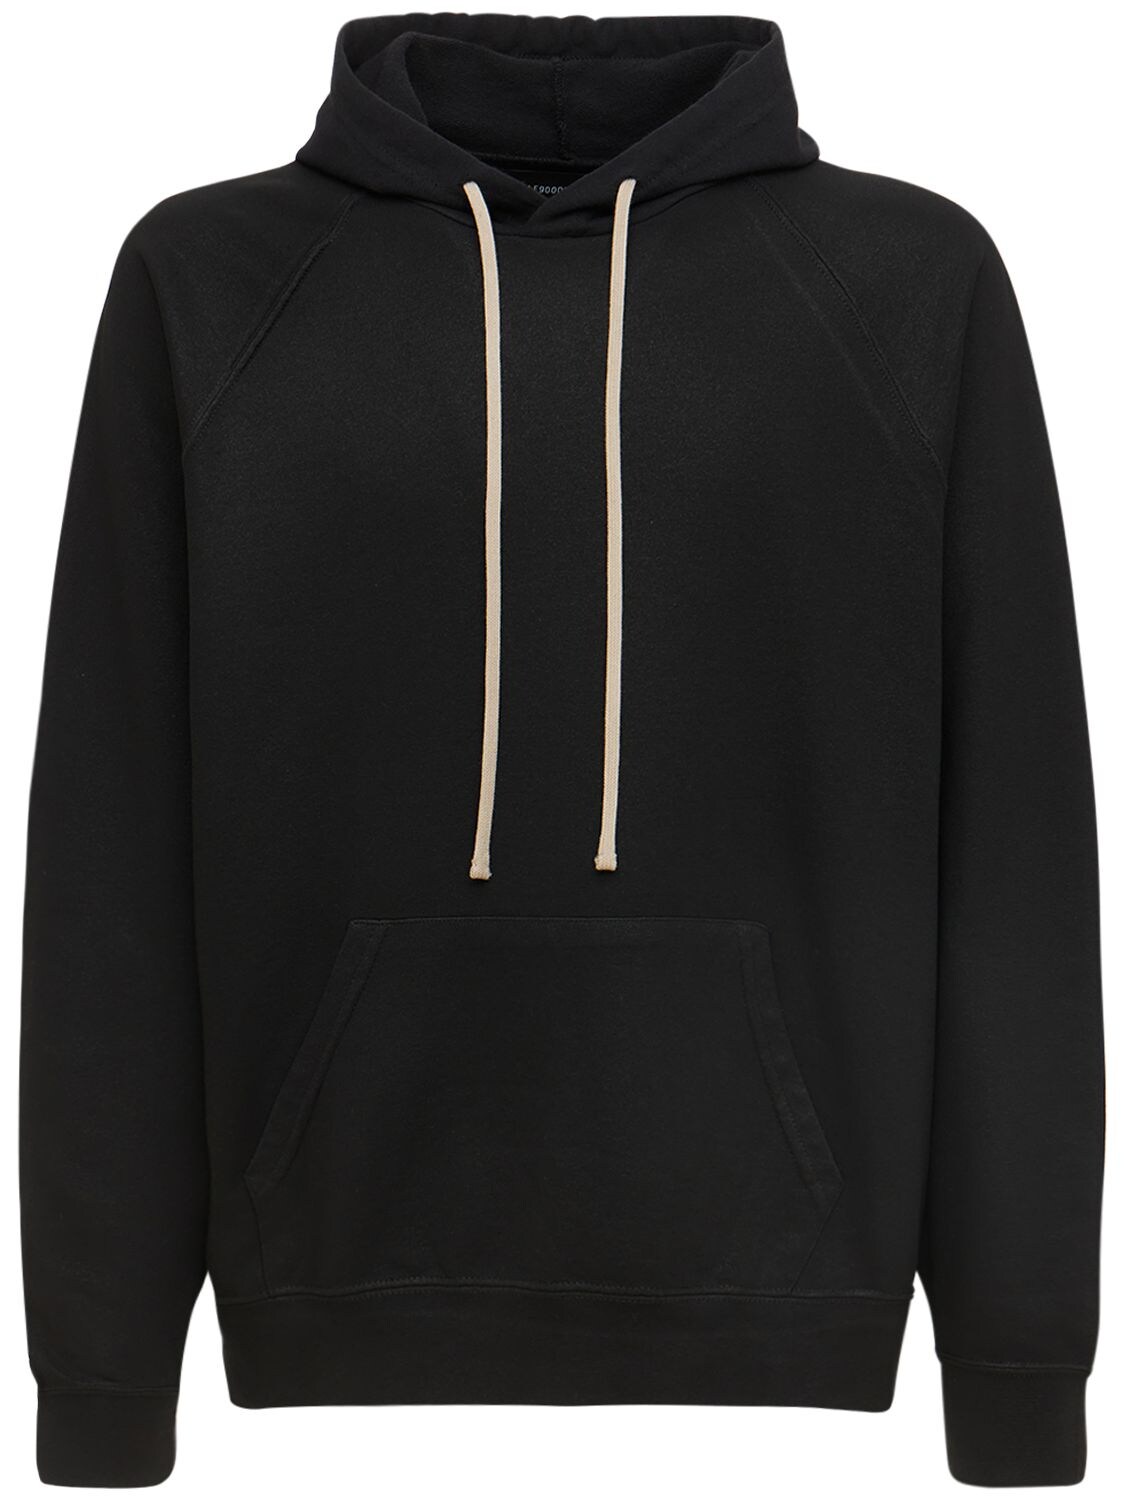 Mille900quindici Waxed Cotton Blend Logo Hoodie In Black